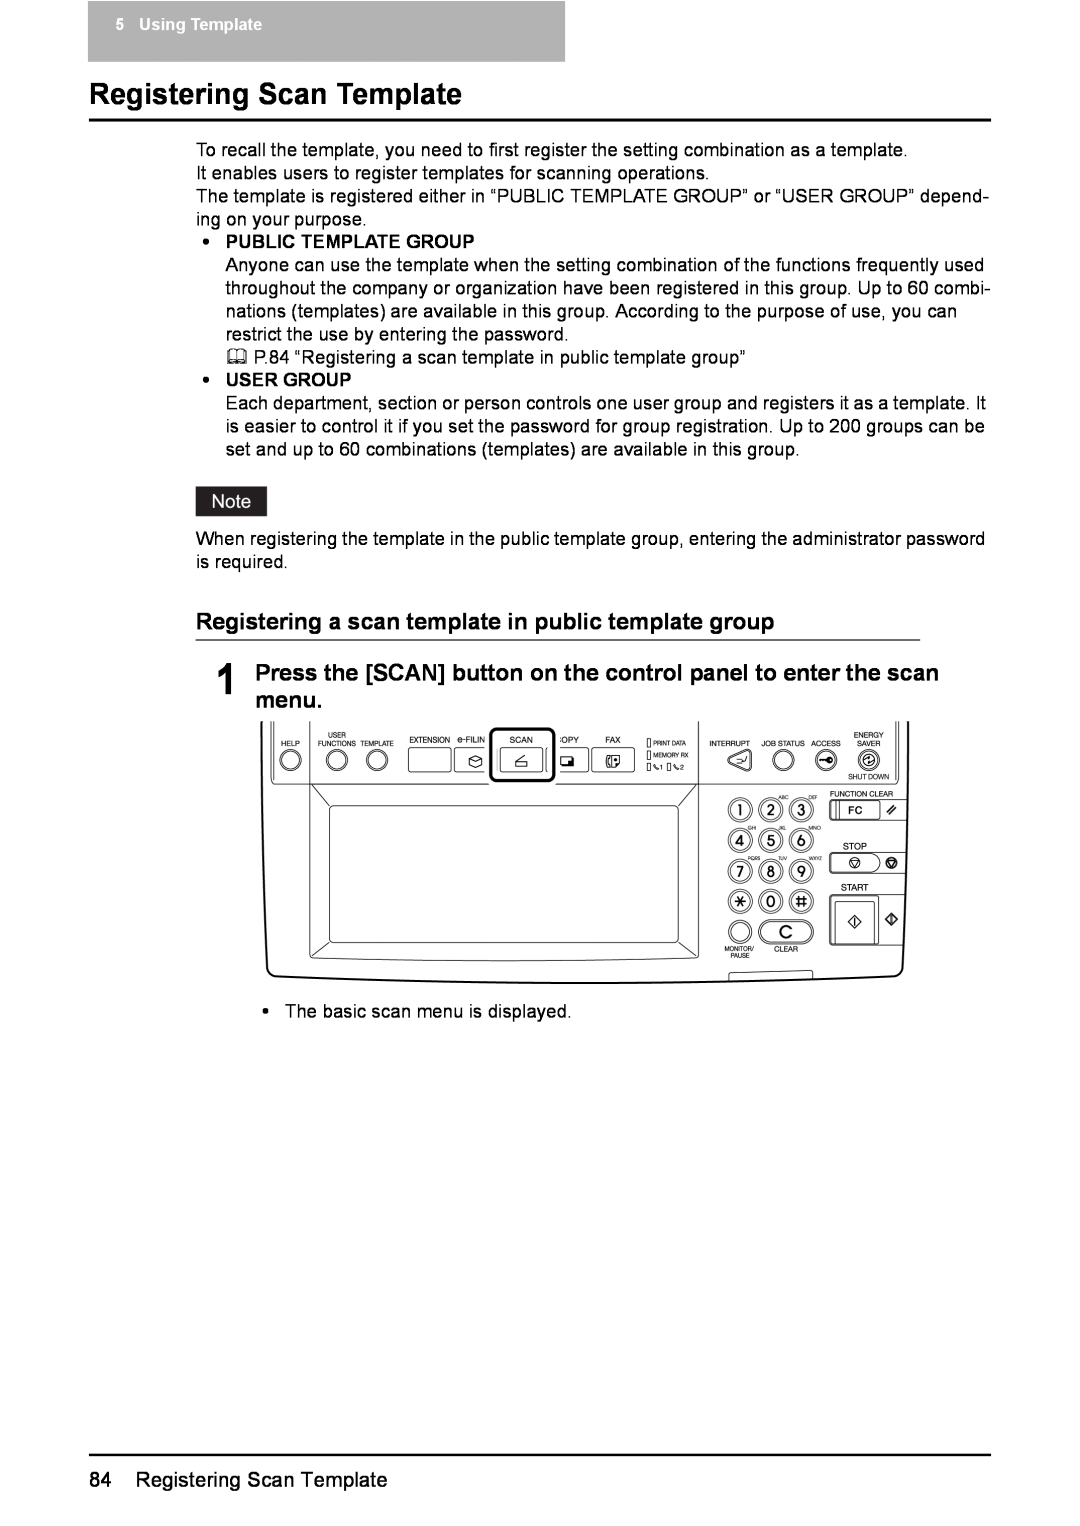 Toshiba 3510C Registering Scan Template, Registering a scan template in public template group, y PUBLIC TEMPLATE GROUP 